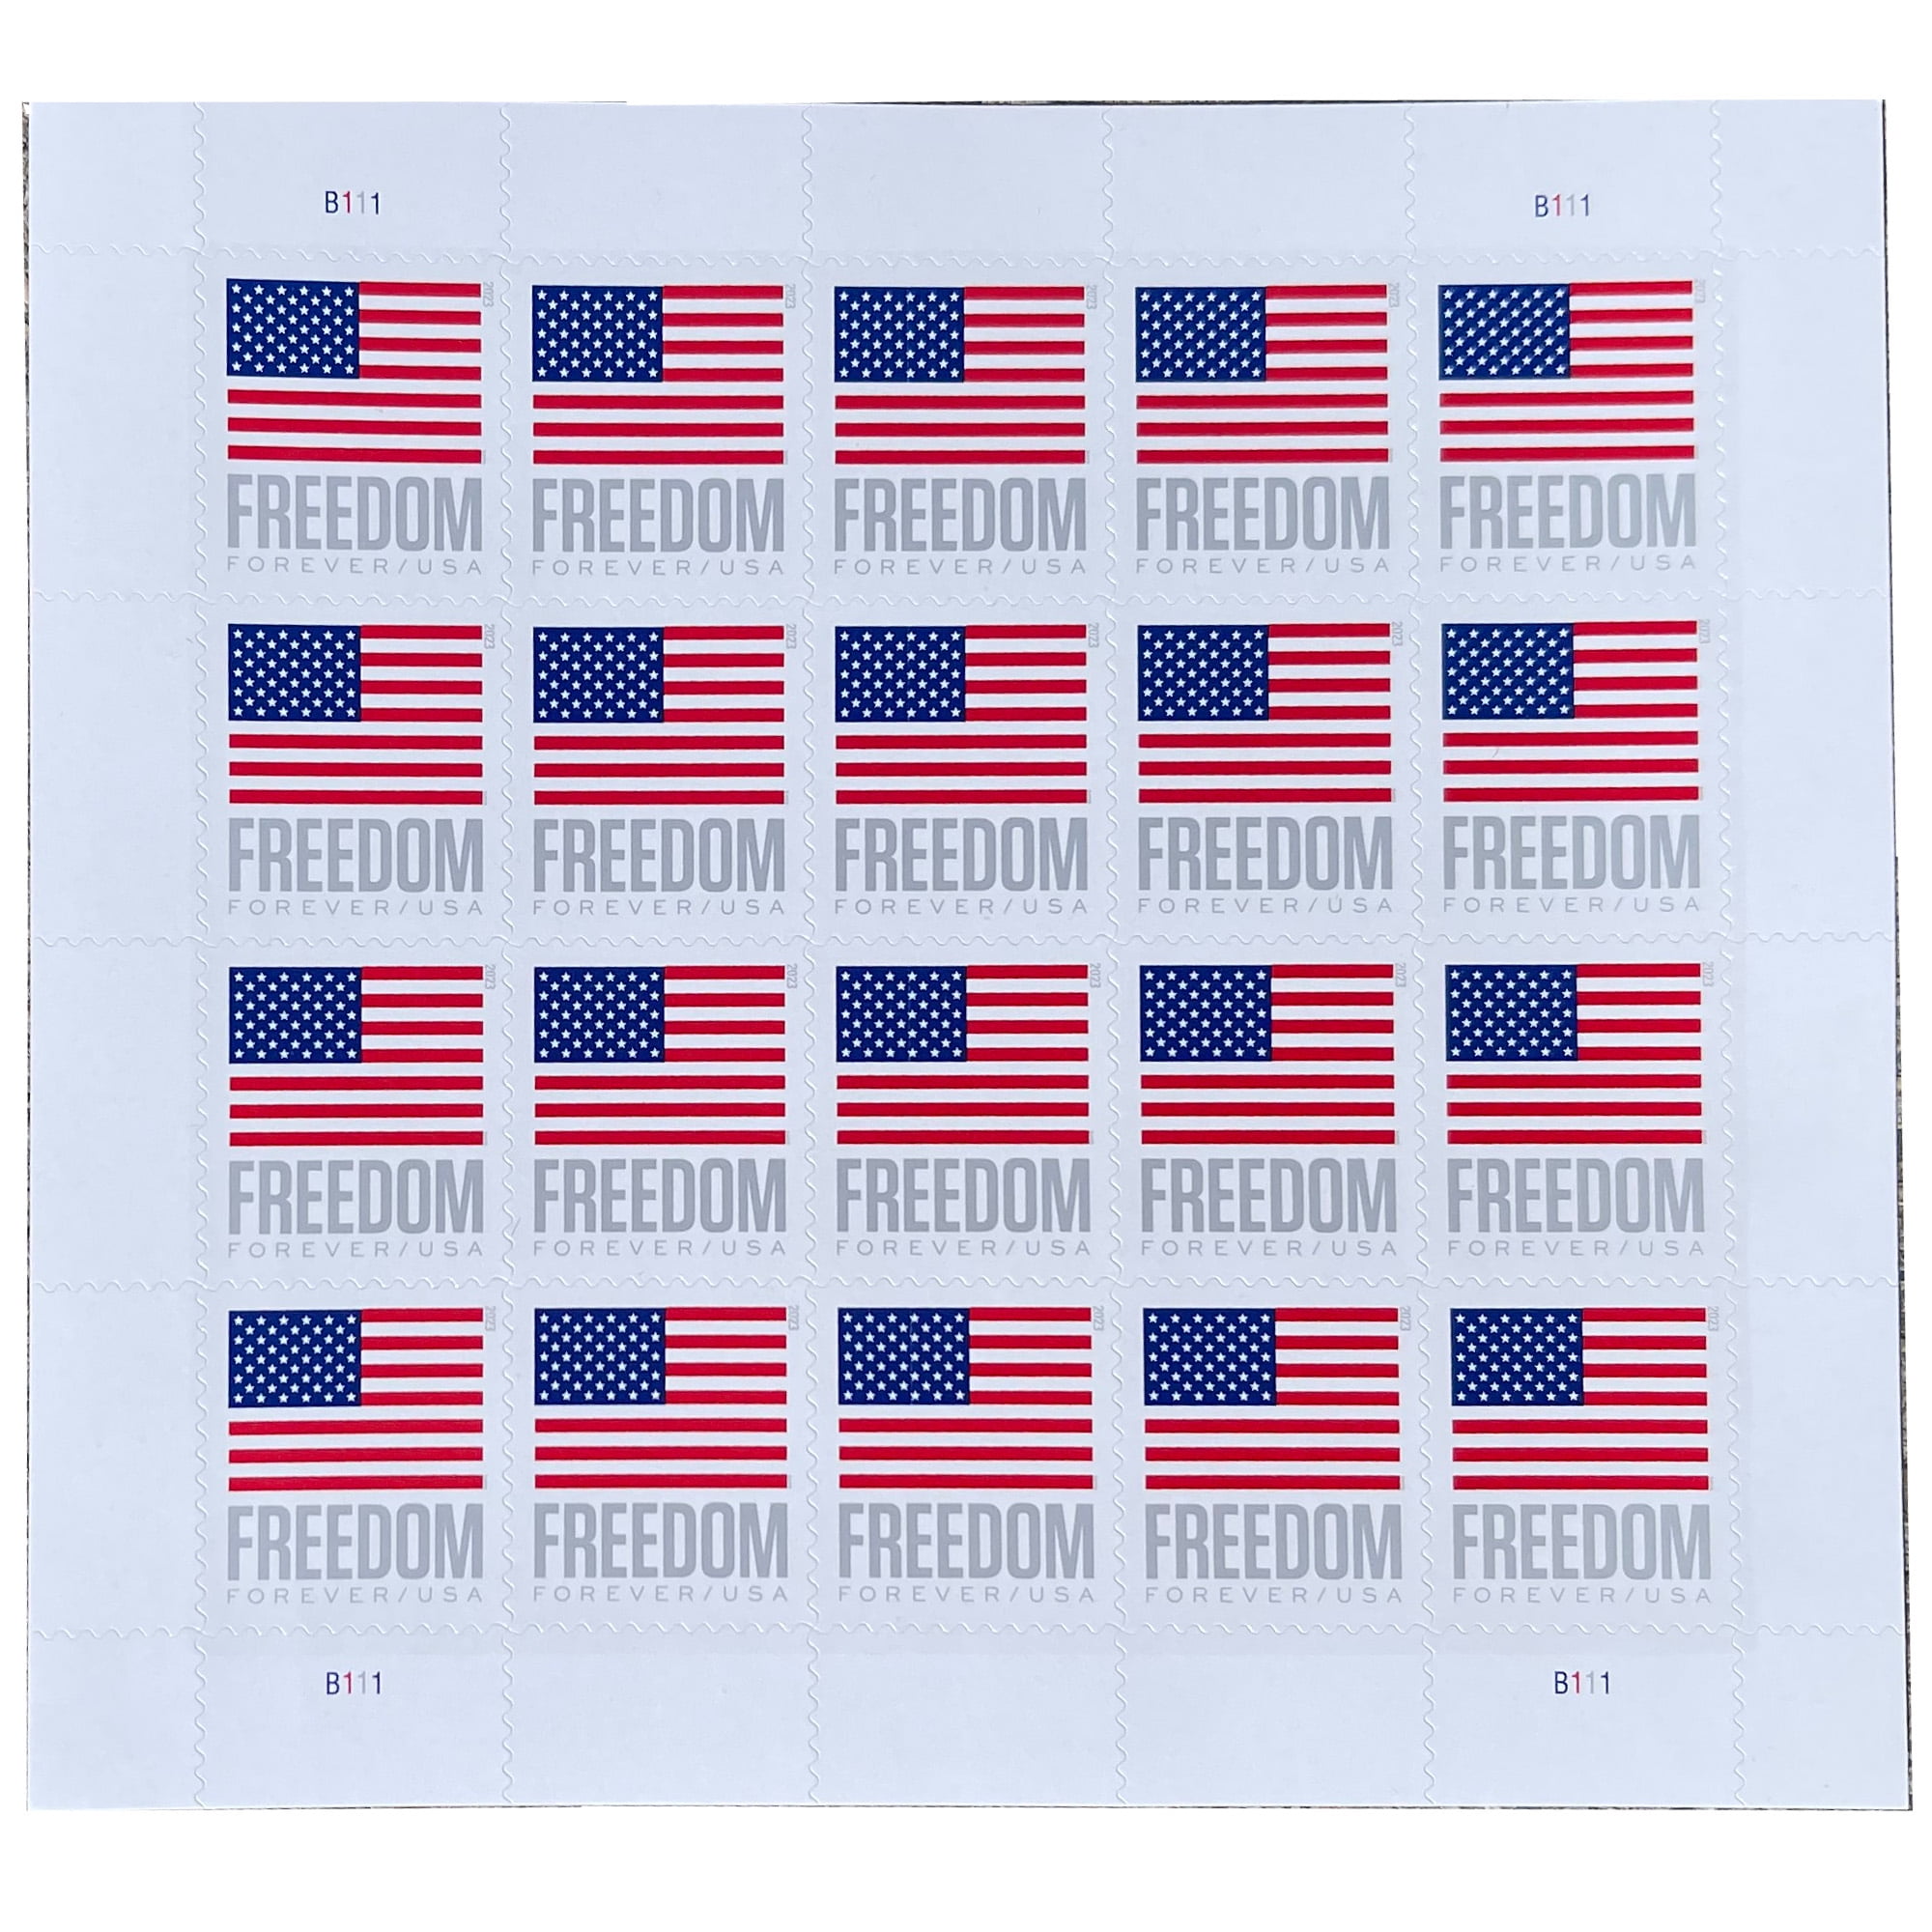 Freedom Flag 2023 USPS Forever Postage Stamp 5 Books of 20 US First Class  Postal Patriotic Country America Stripes Stars Old Glory USA Celebration